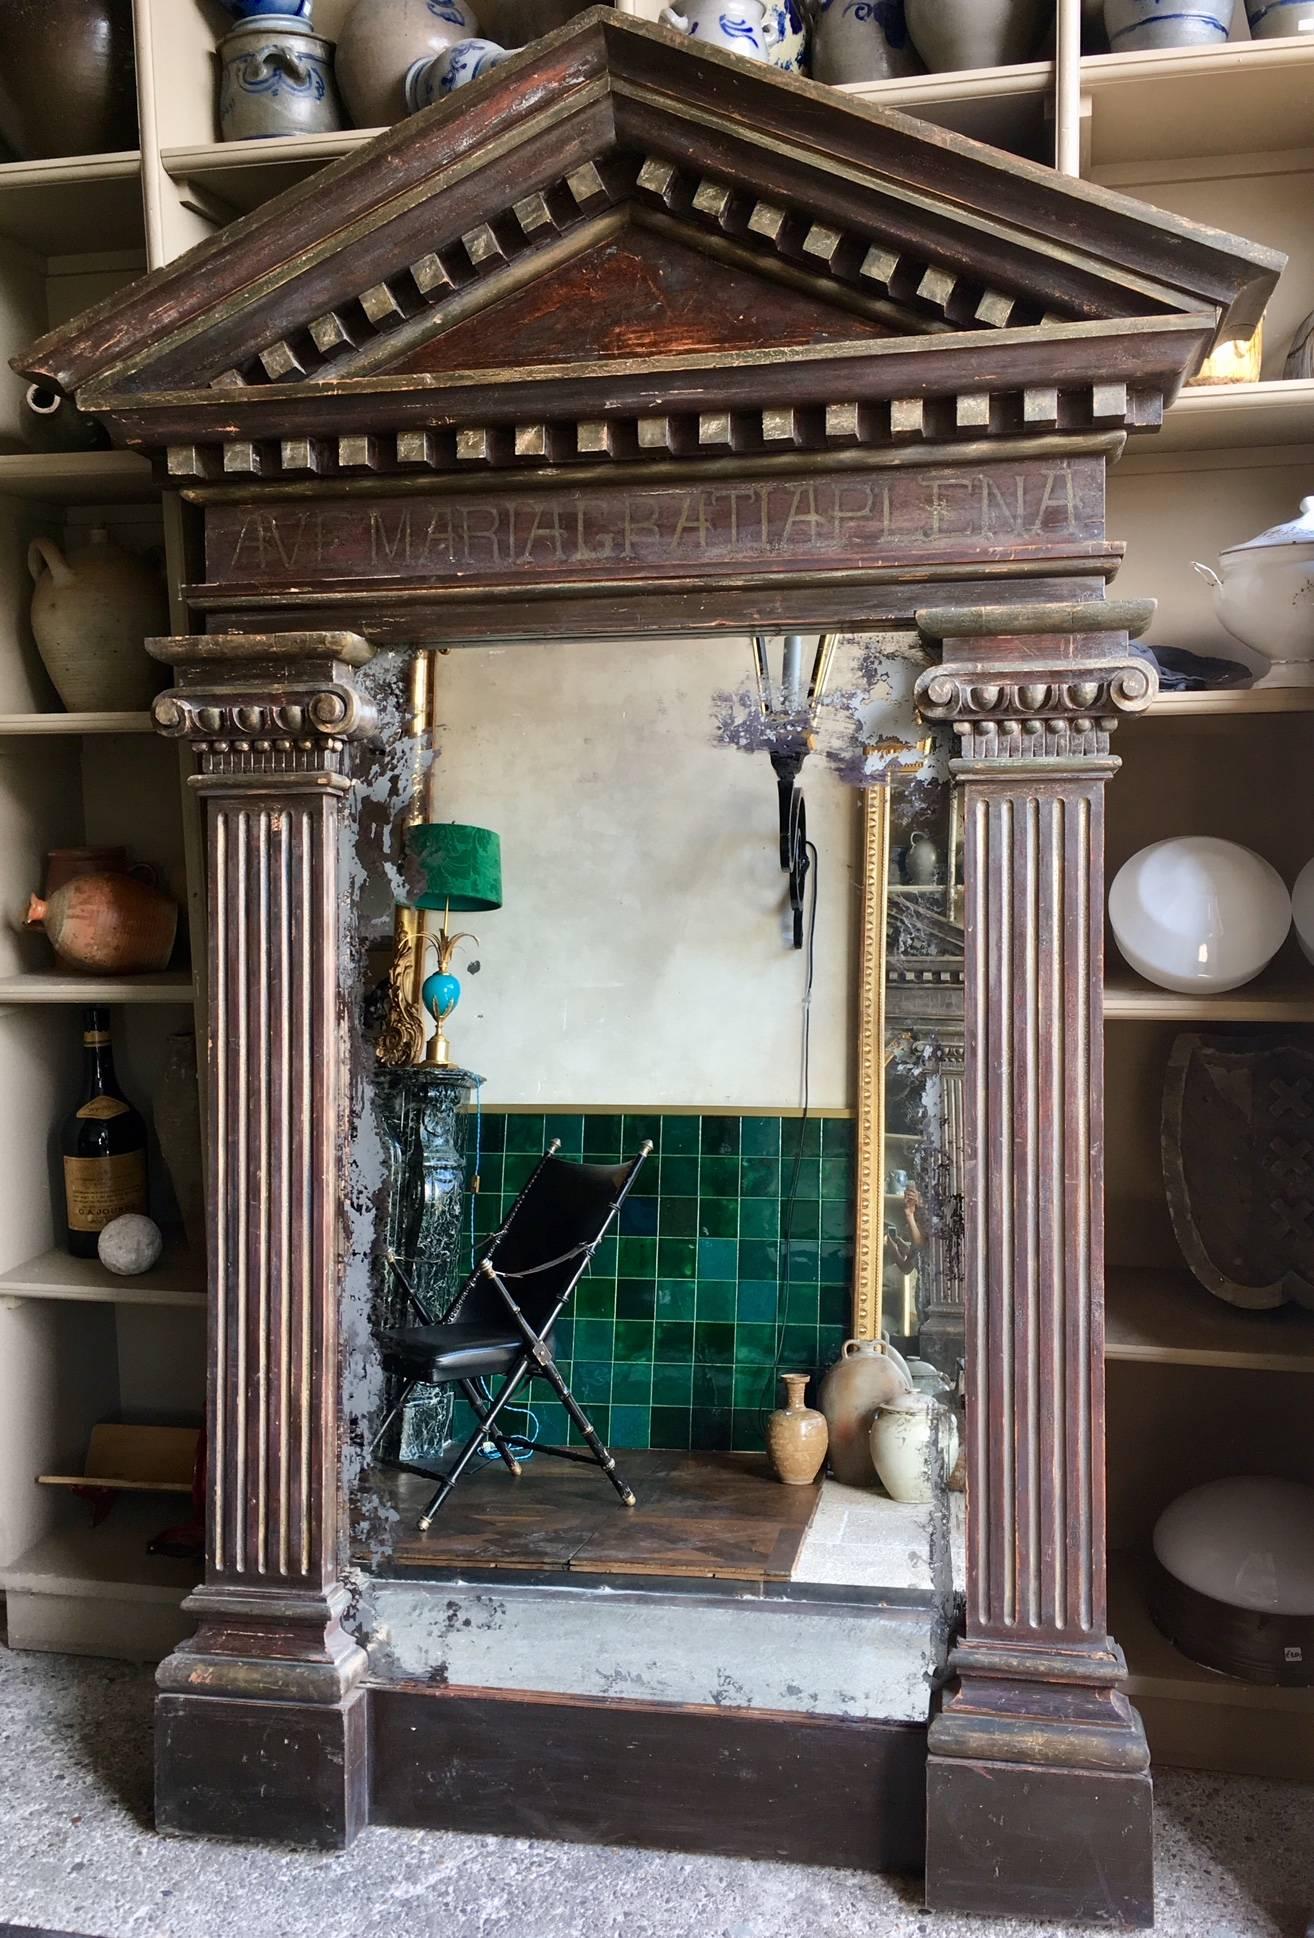 Large mirror in antique decorative frame. The frame is decorated with architectural elements such as a tympanum and Ionic pilasters. Under the tympanum the text 